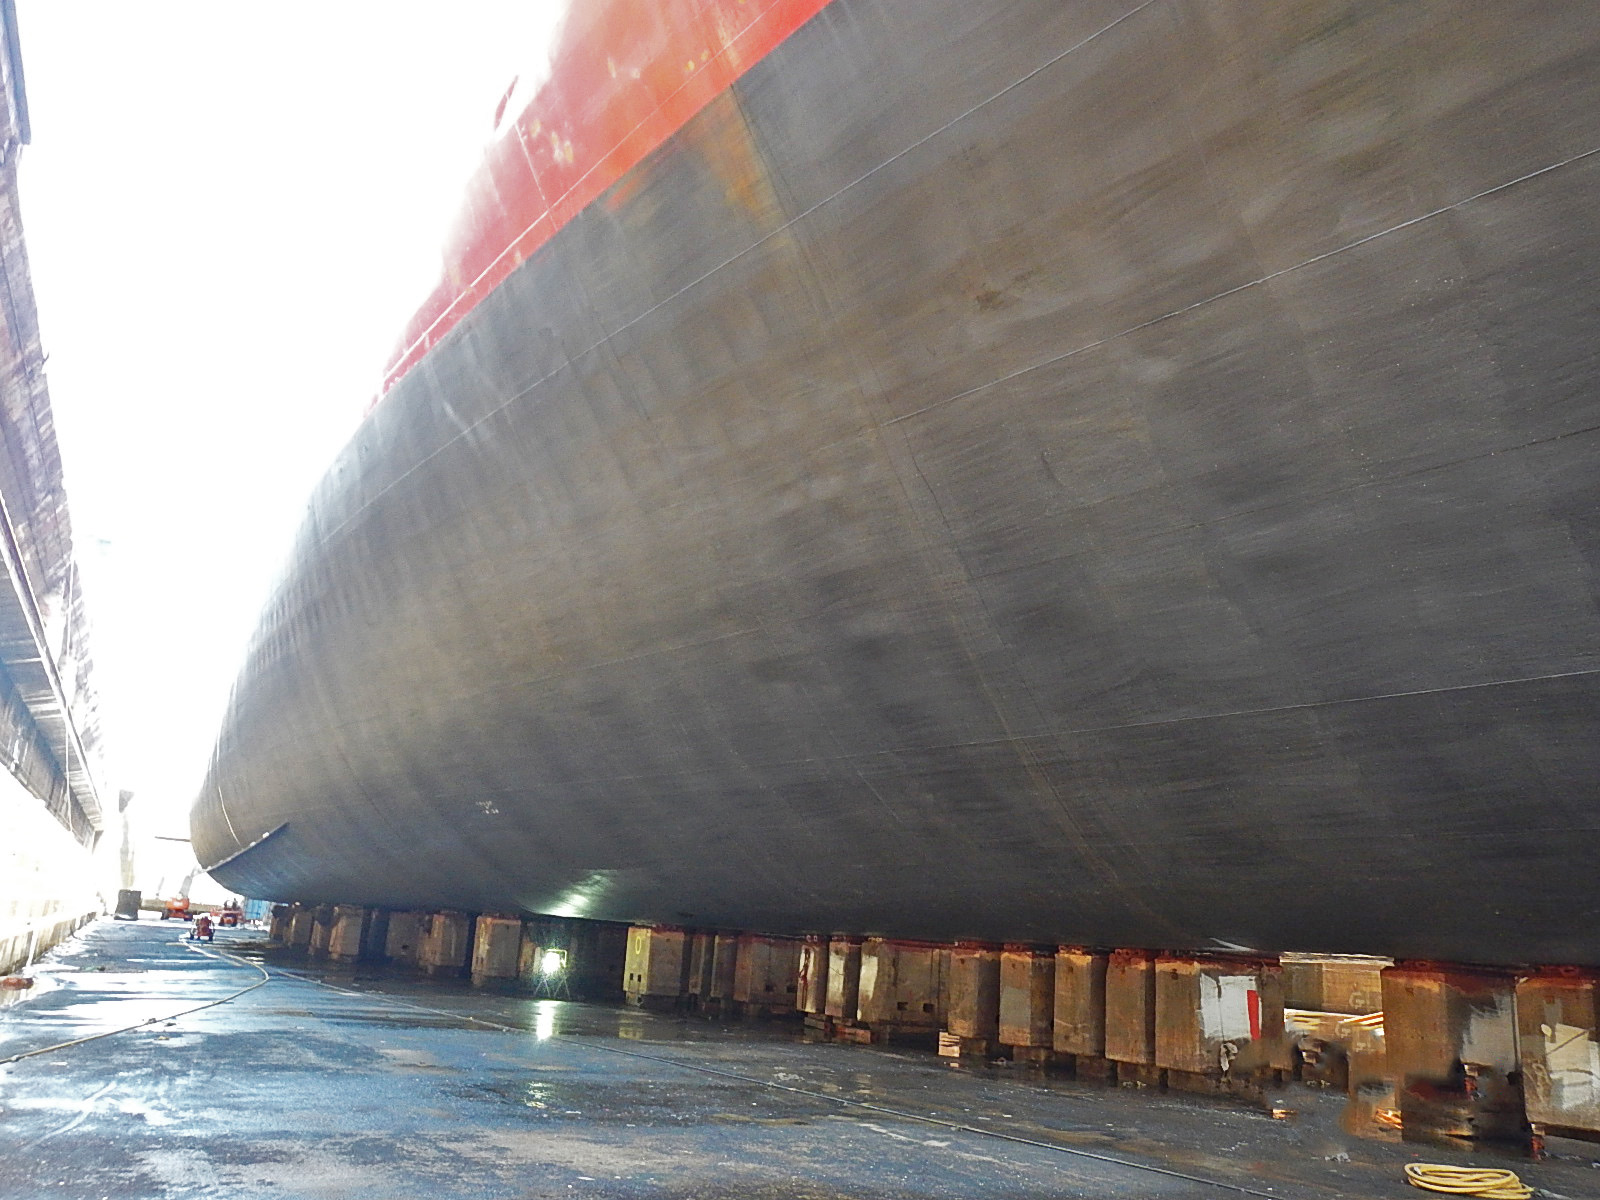 The hull of the Sanderling in drydock in 2016 after only high-pressure washing